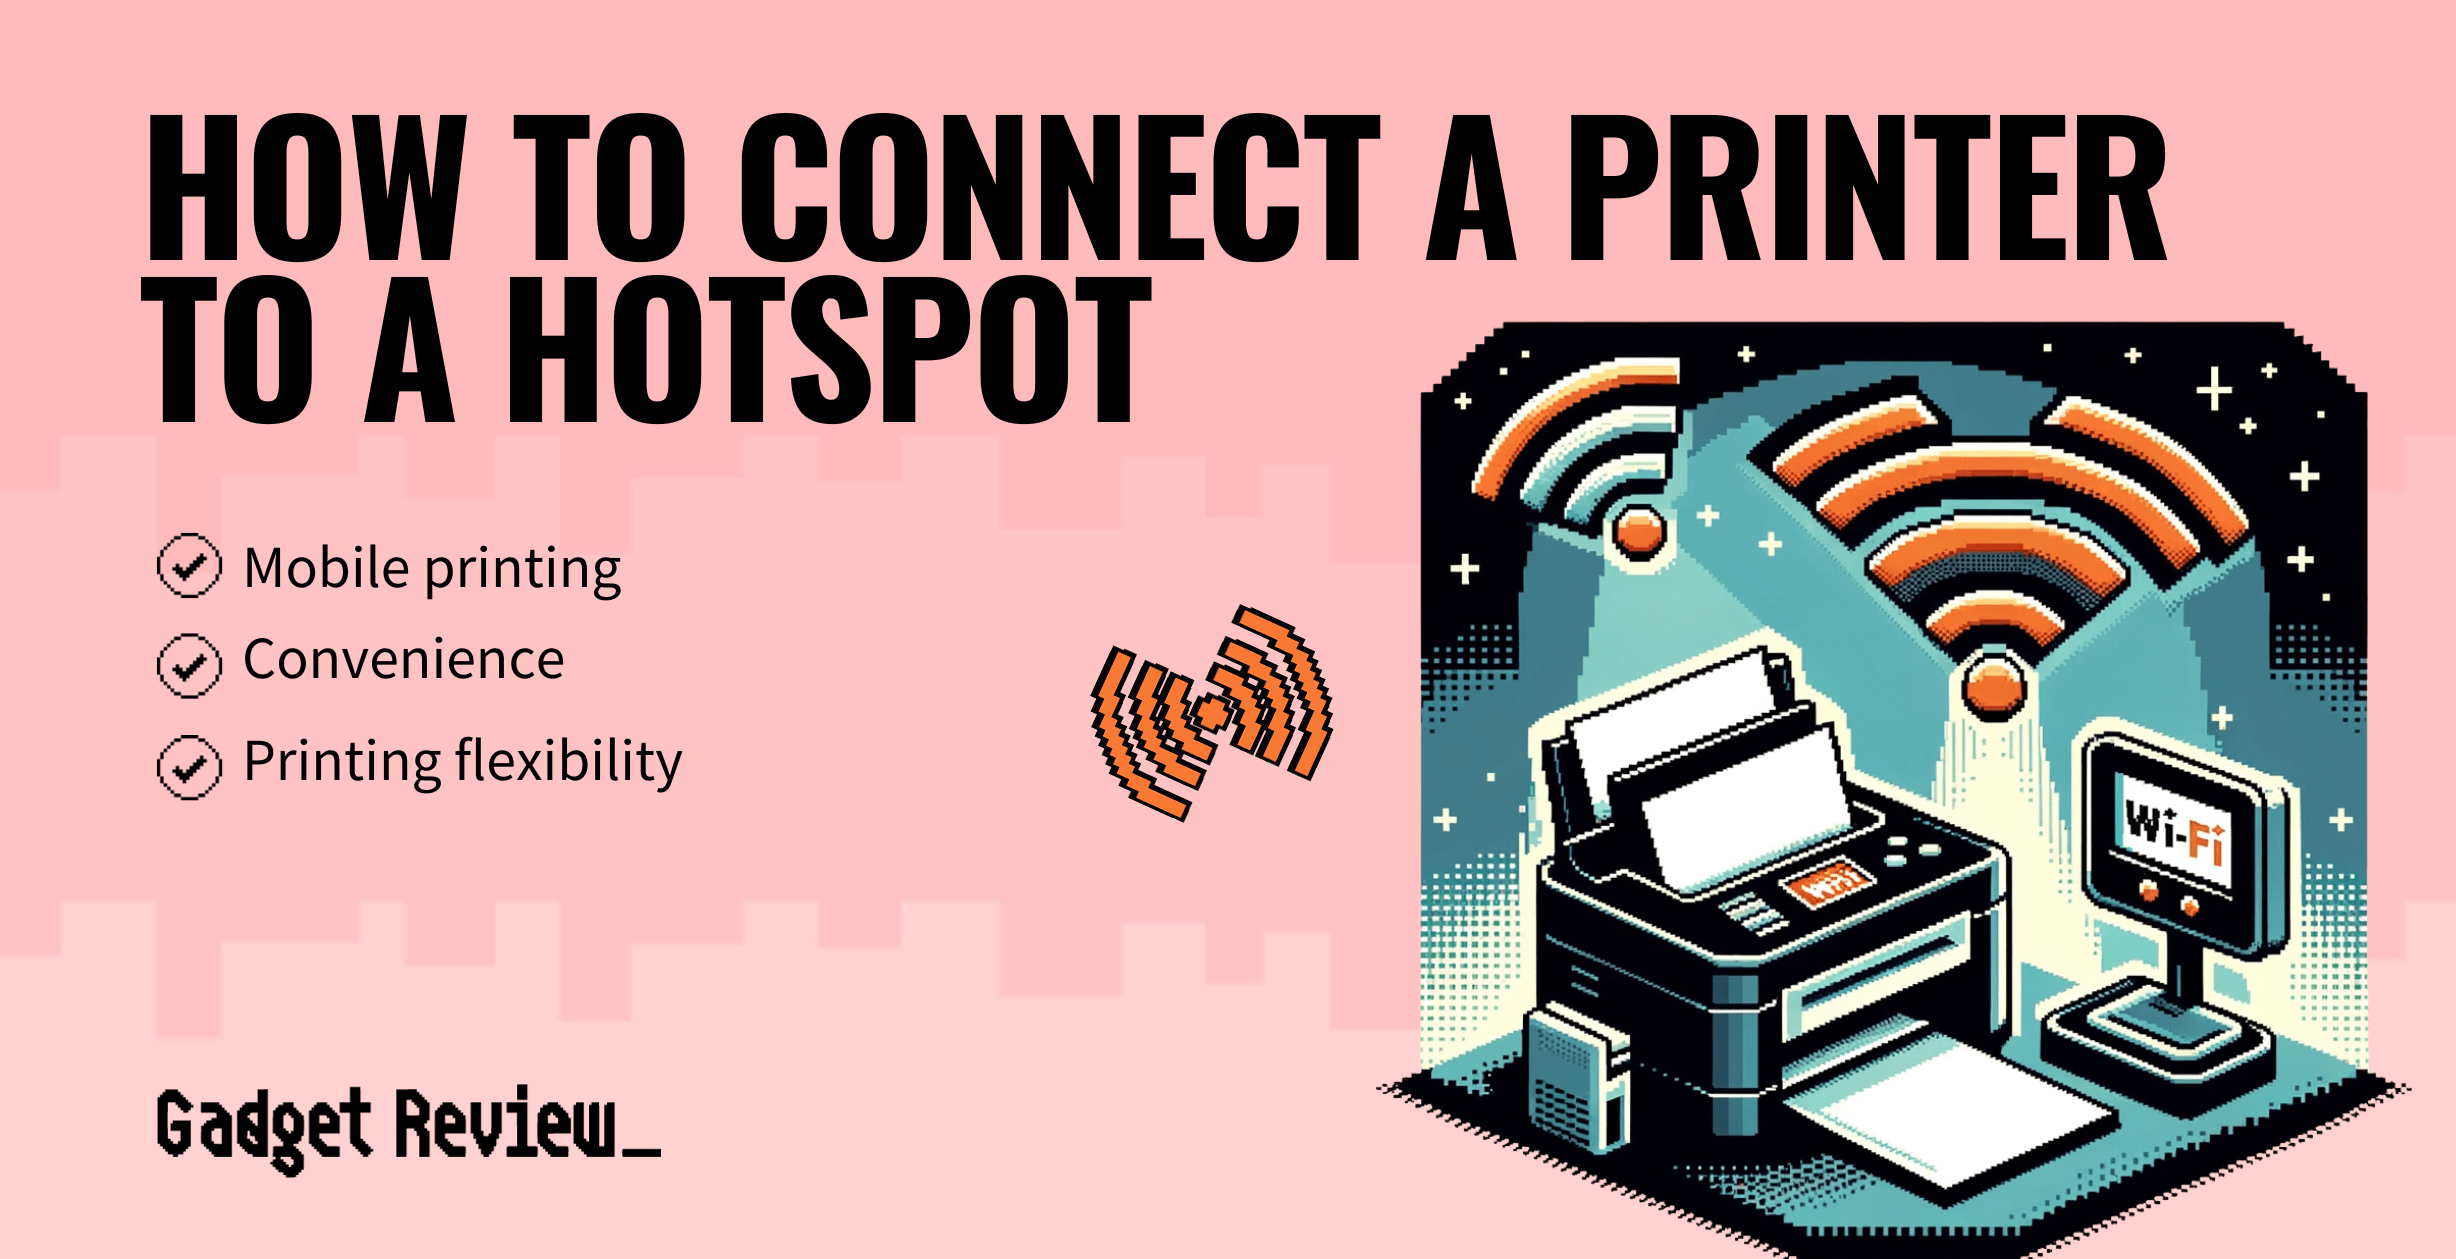 How to Connect a Printer to a Hotspot